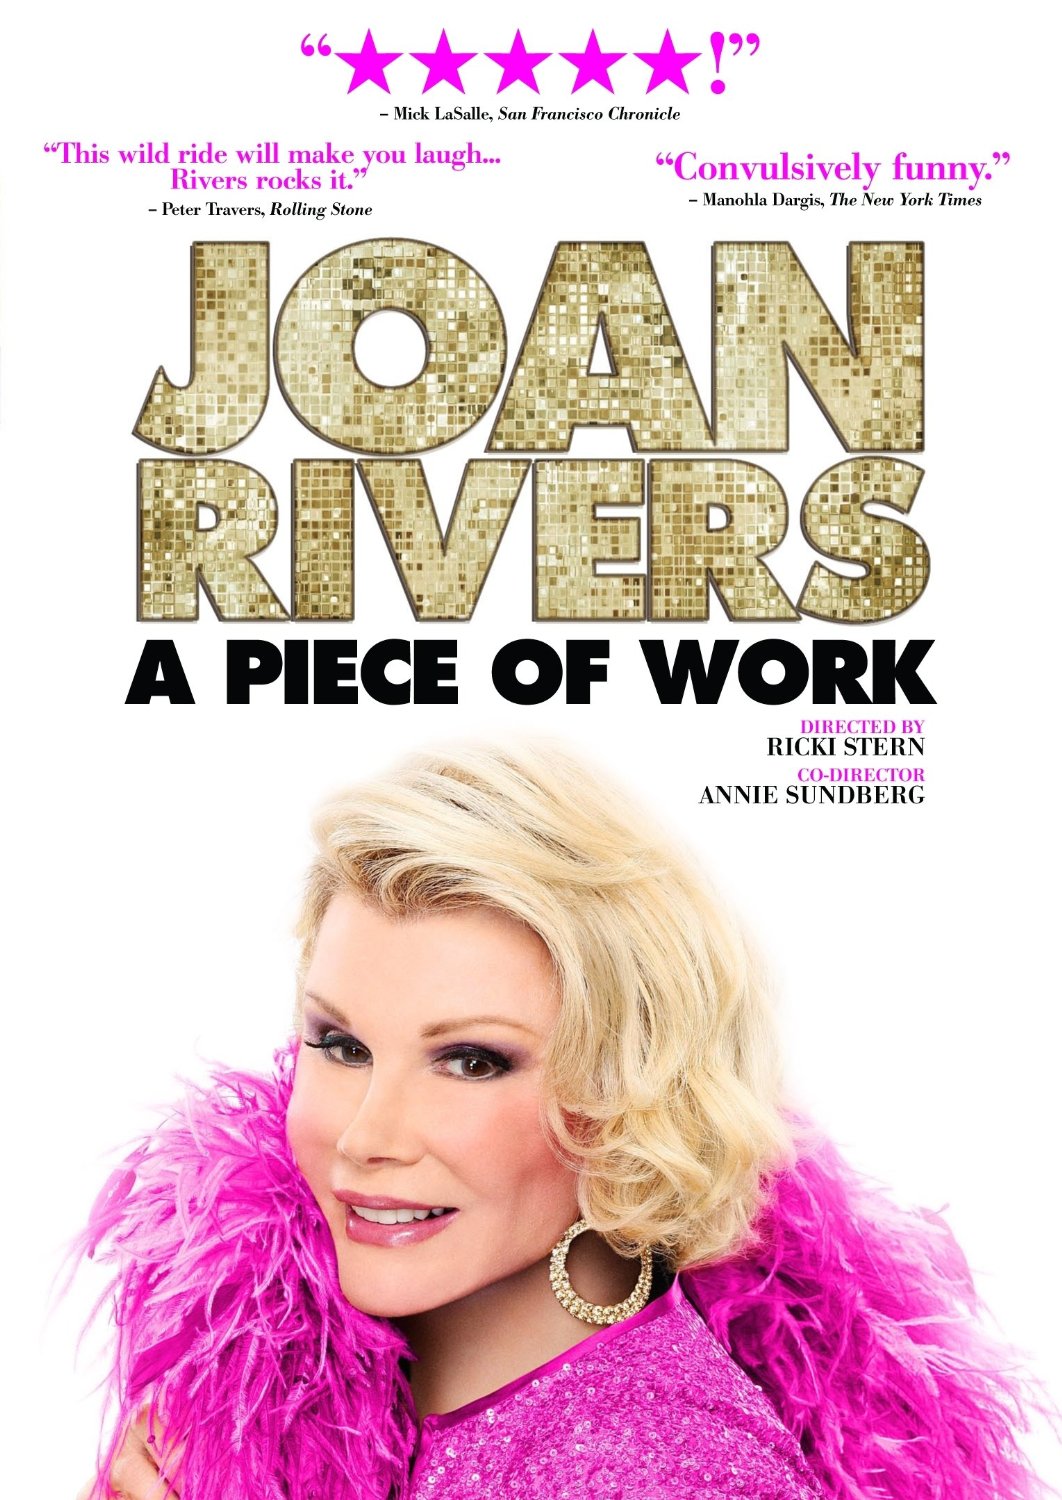 joan-rivers-a-piece-of-work